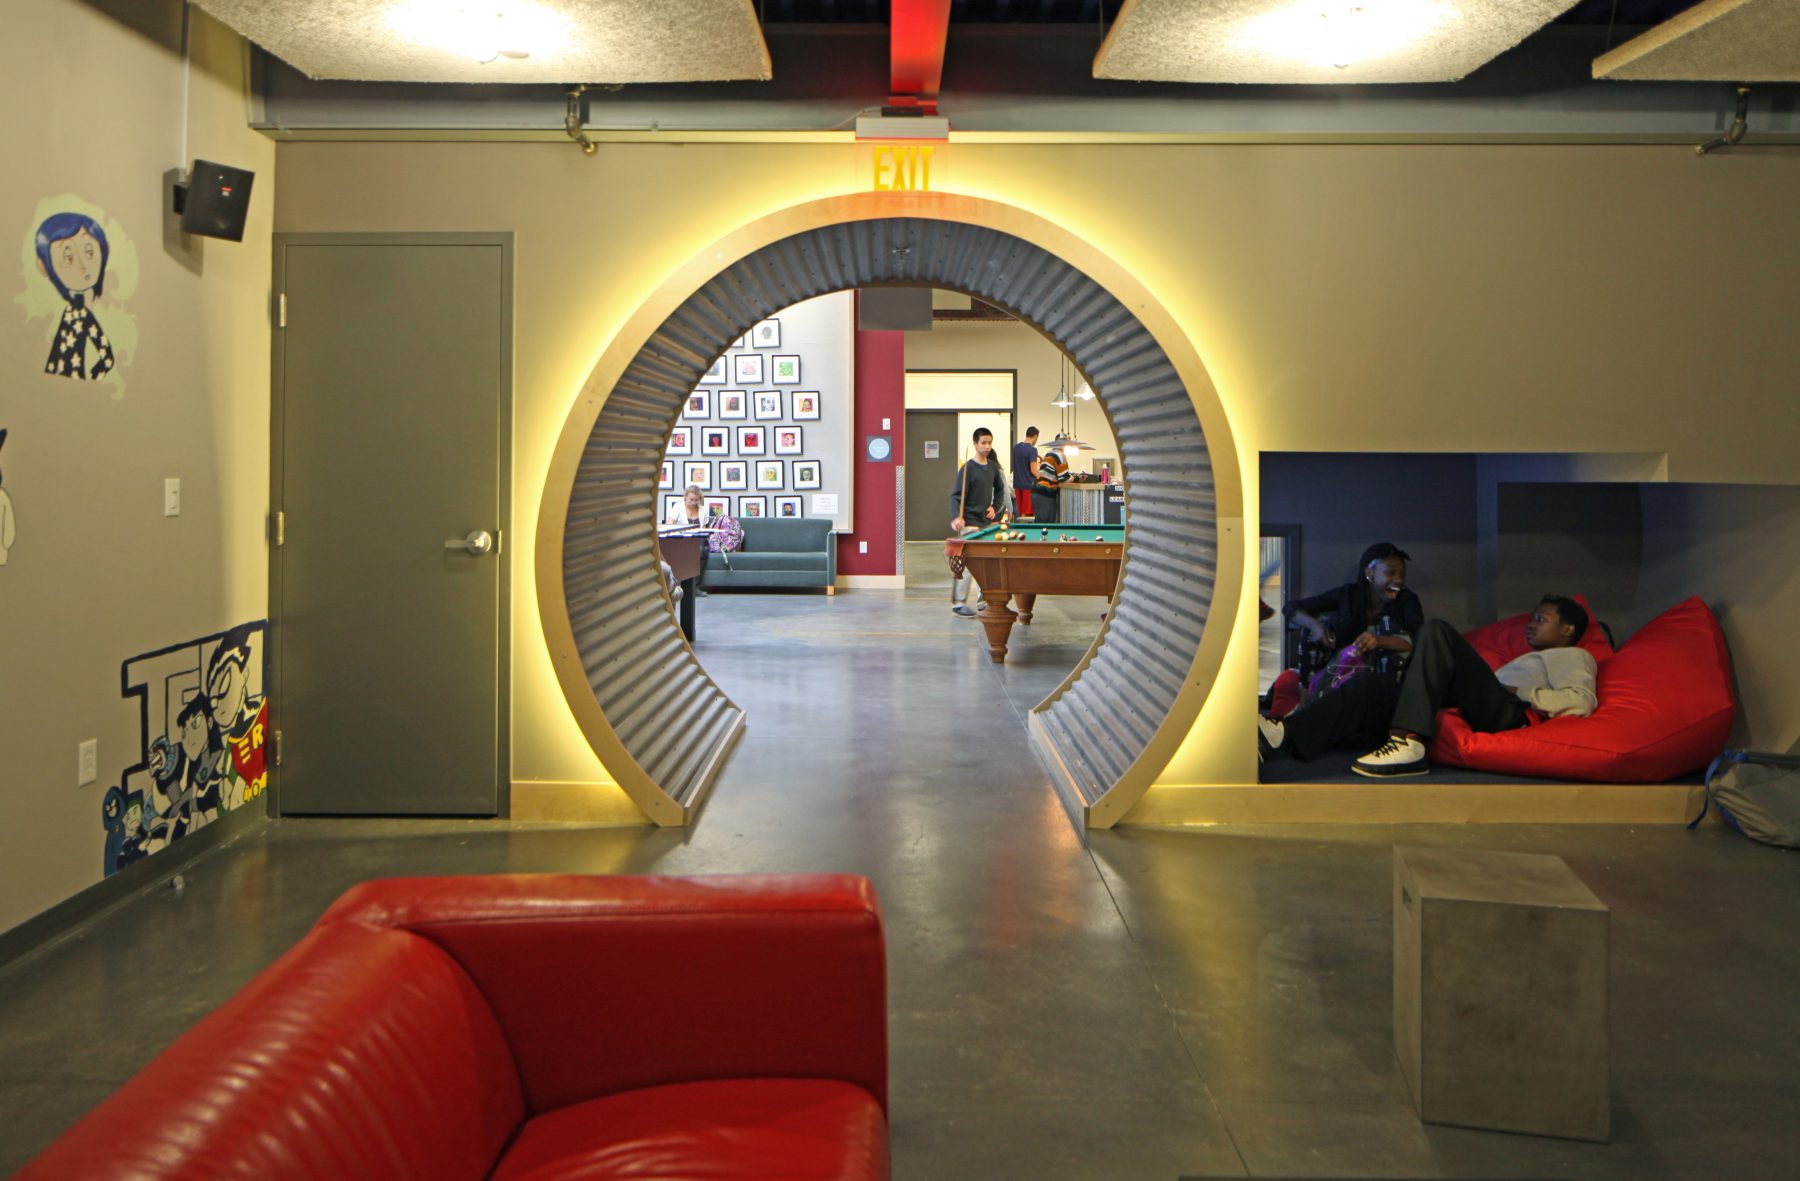 Brookline Teen Center Interior with lounge areas and circular arch way